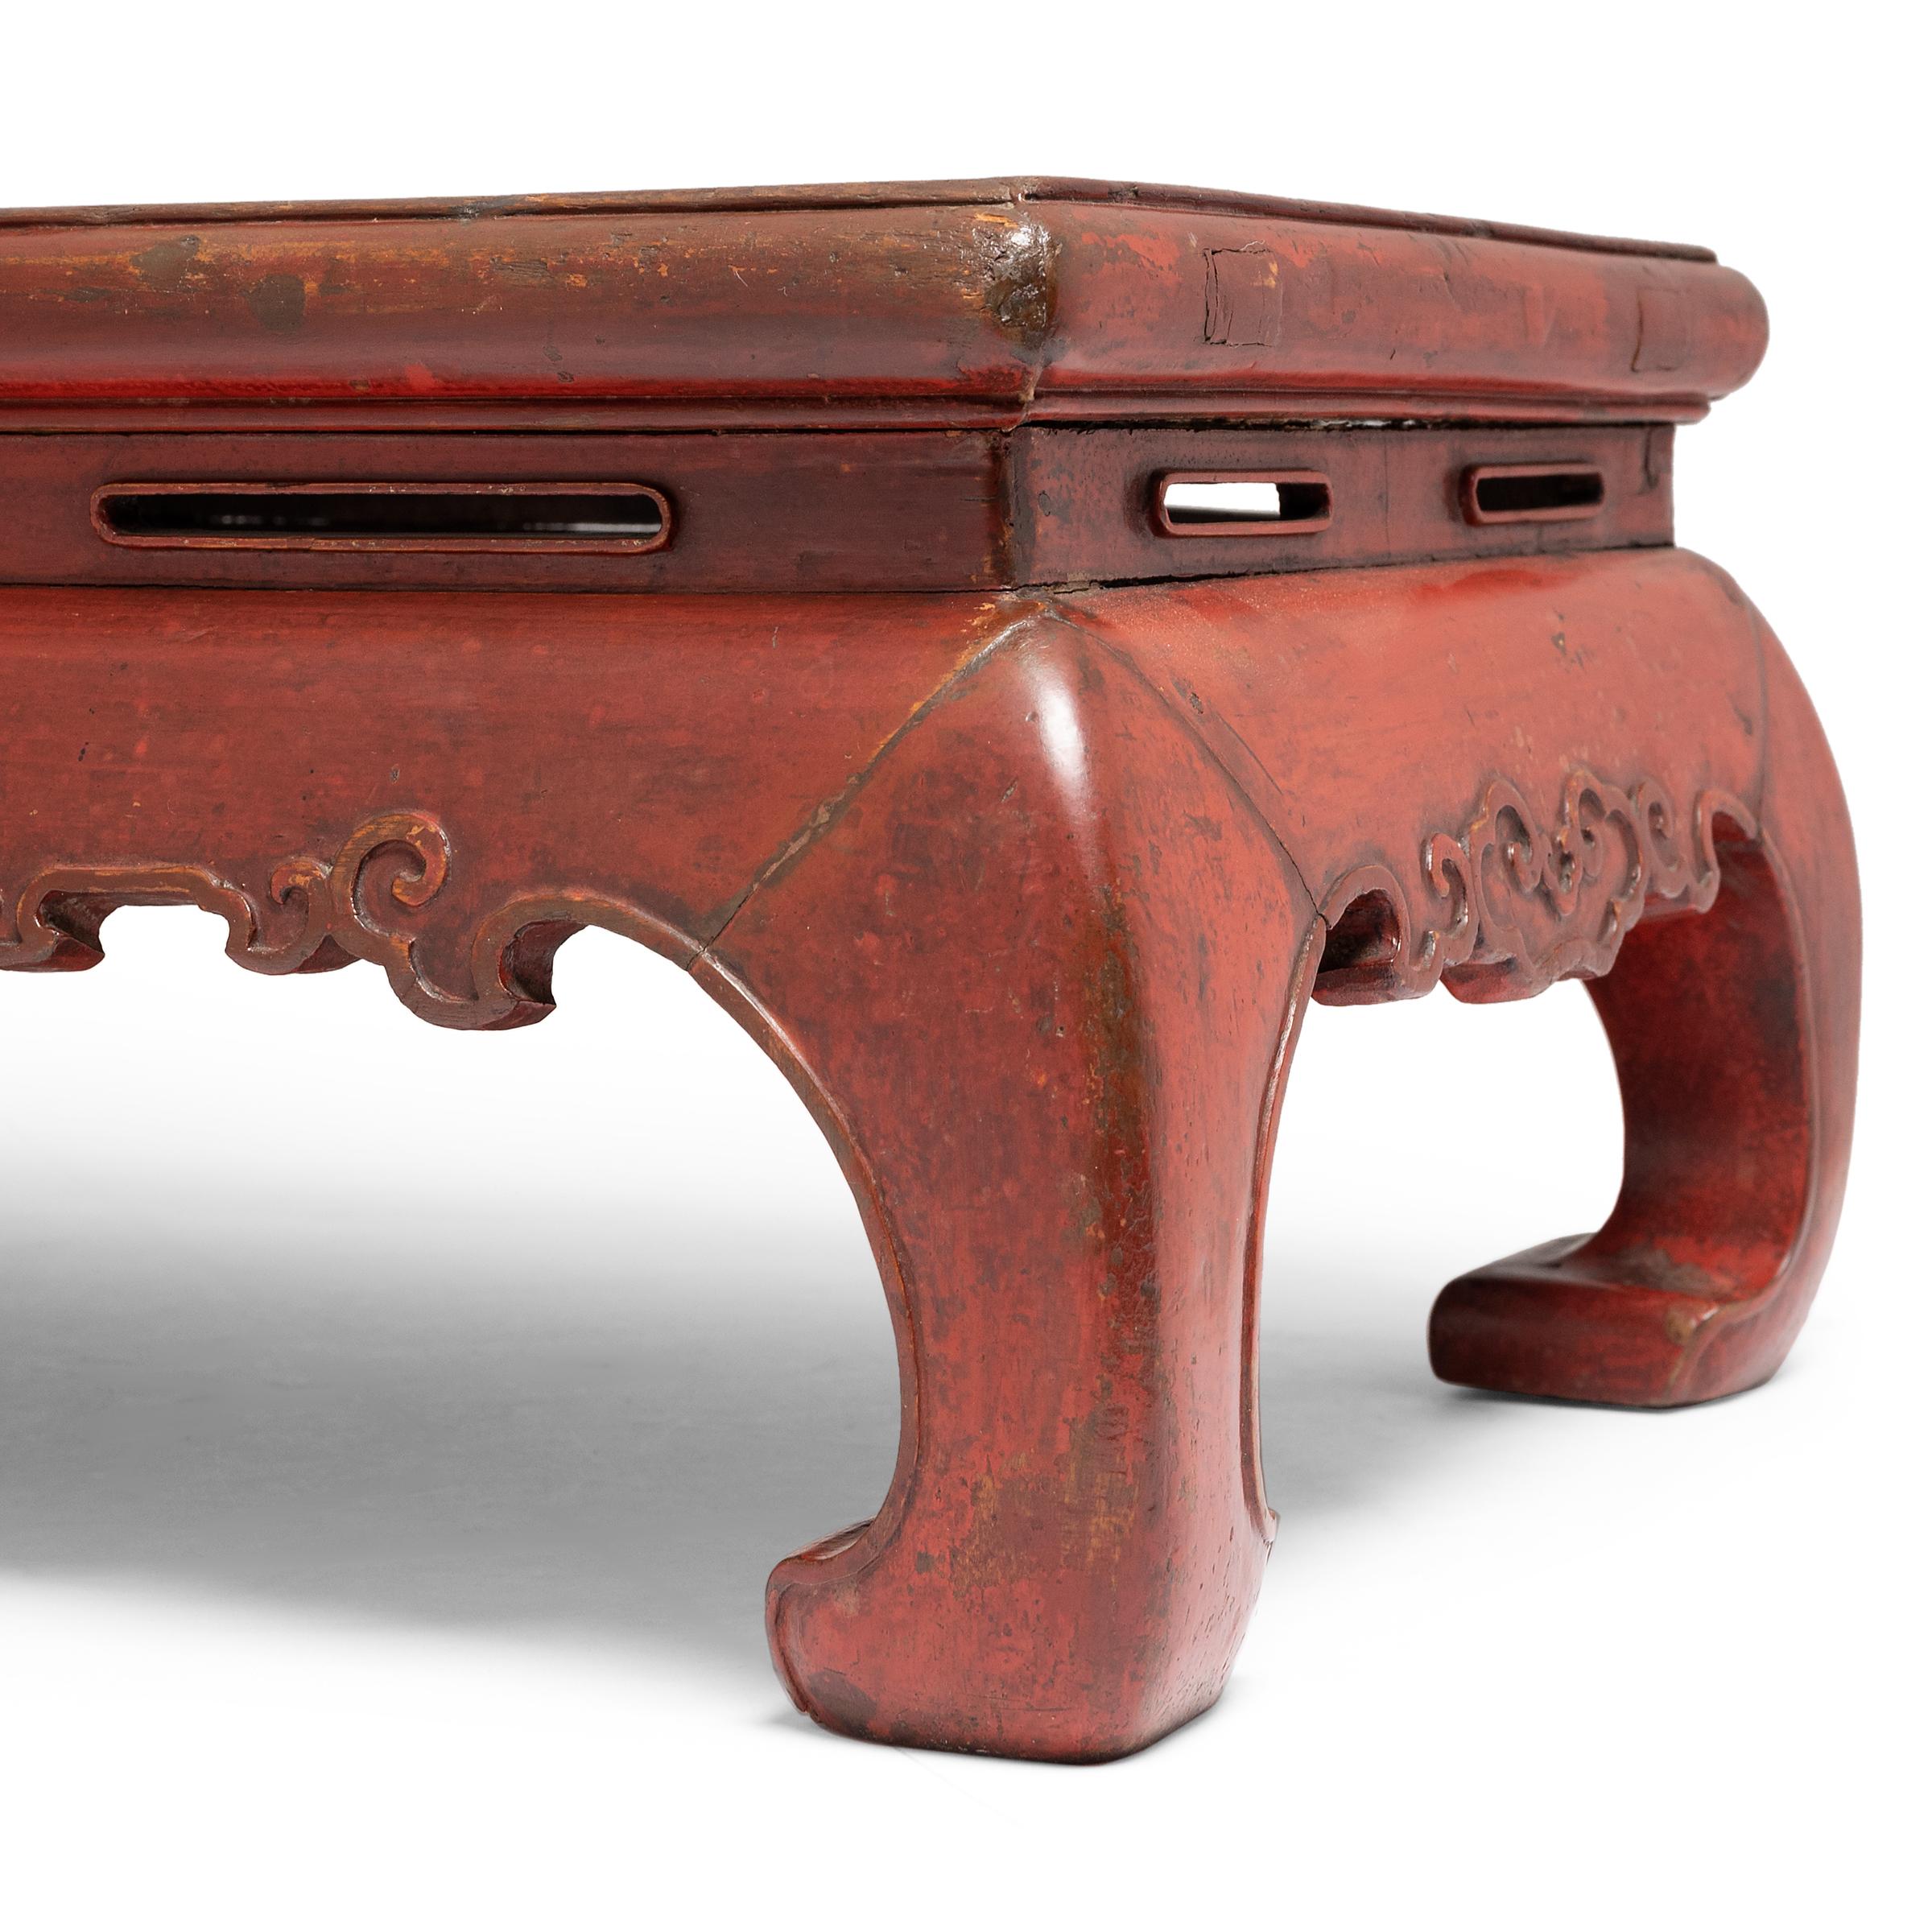 20th Century Chinese Red Lacquer Kang Table, c. 1900